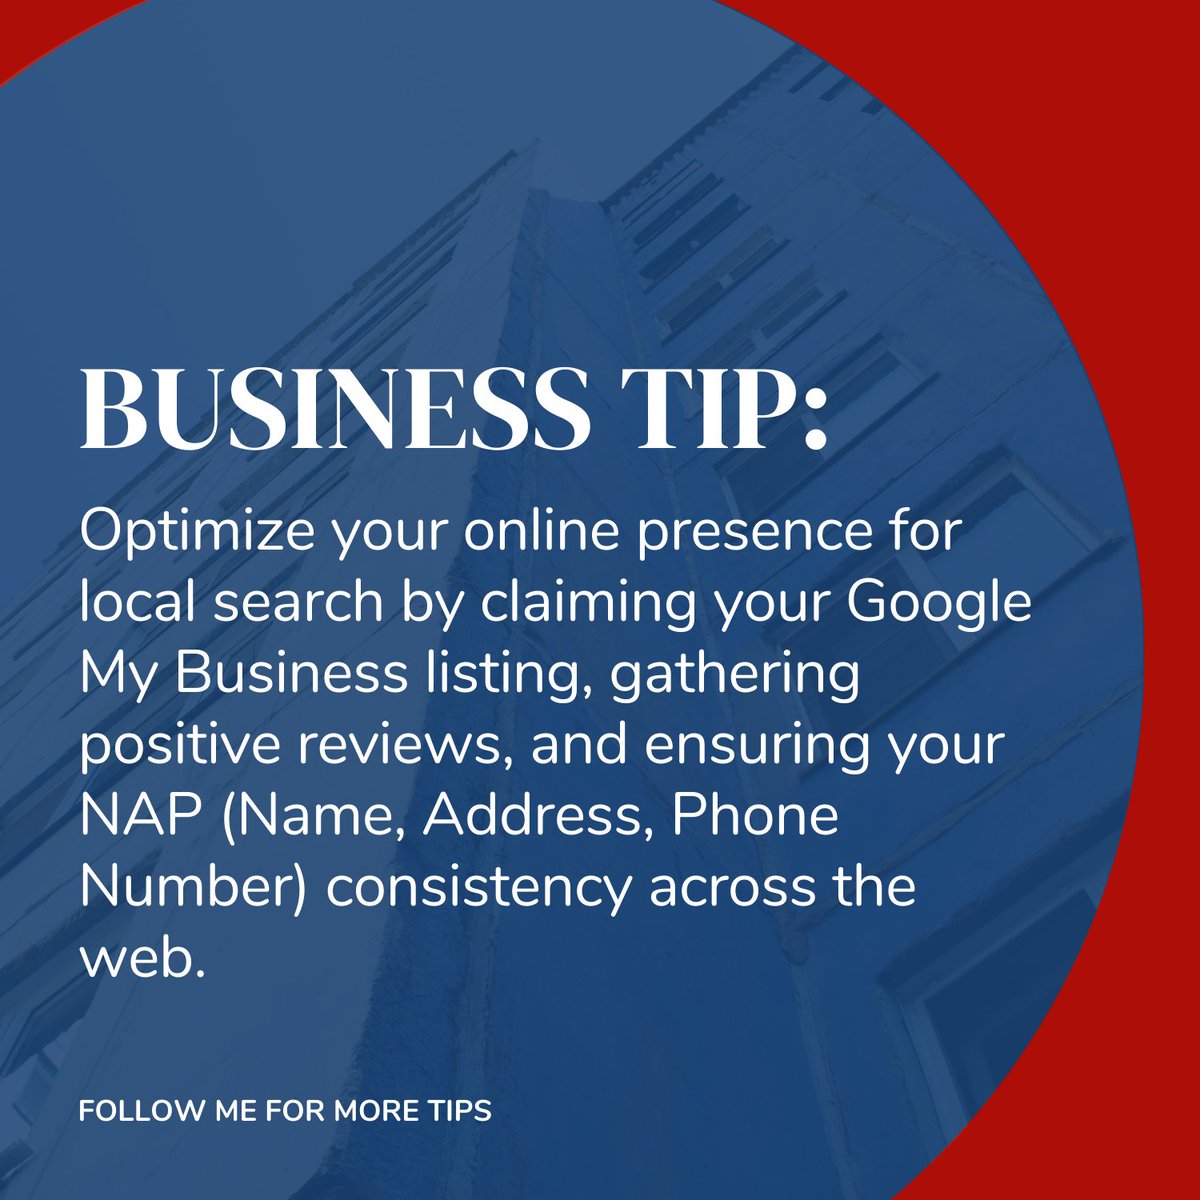 Leverage Local SEO 
💡- Tip: Optimize your online presence for local search by claiming your Google My Business listing, gathering positive reviews, and ensuring your NAP (Name, Address, Phone Number) consistency across the web. 
#LocalSEO #SmallBusinessSEO #EntrepreneurSuccess